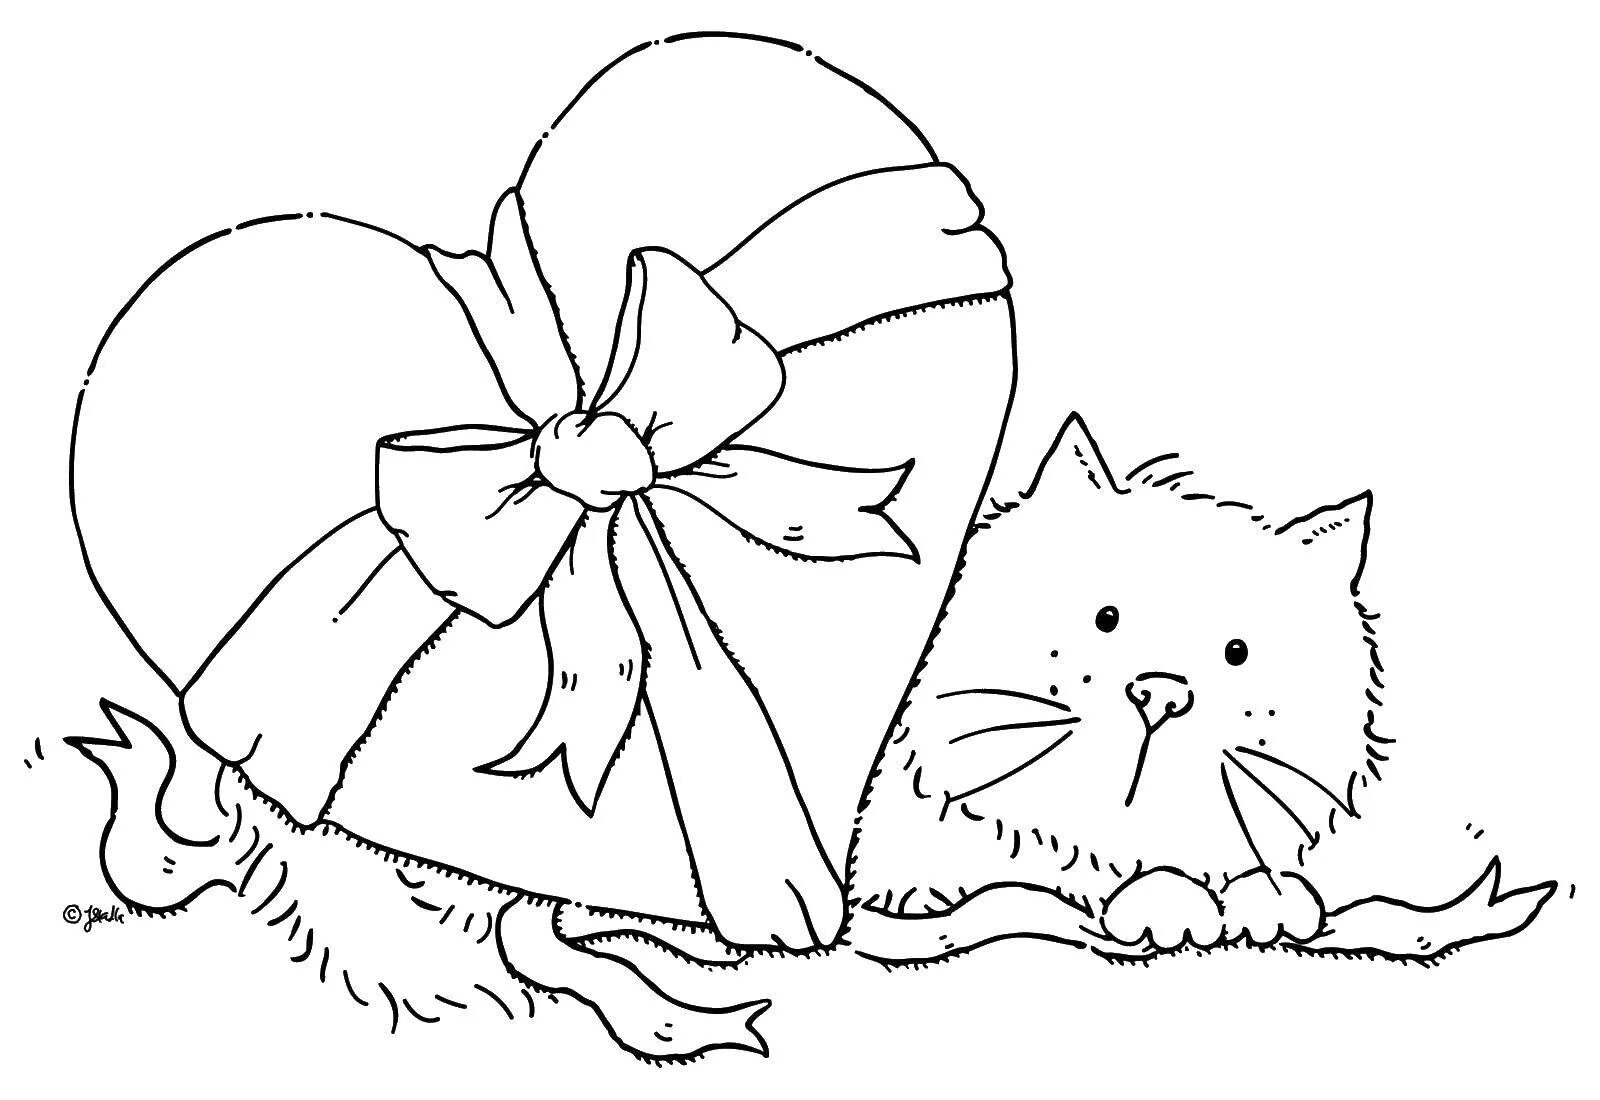 Exquisite cat lily coloring page